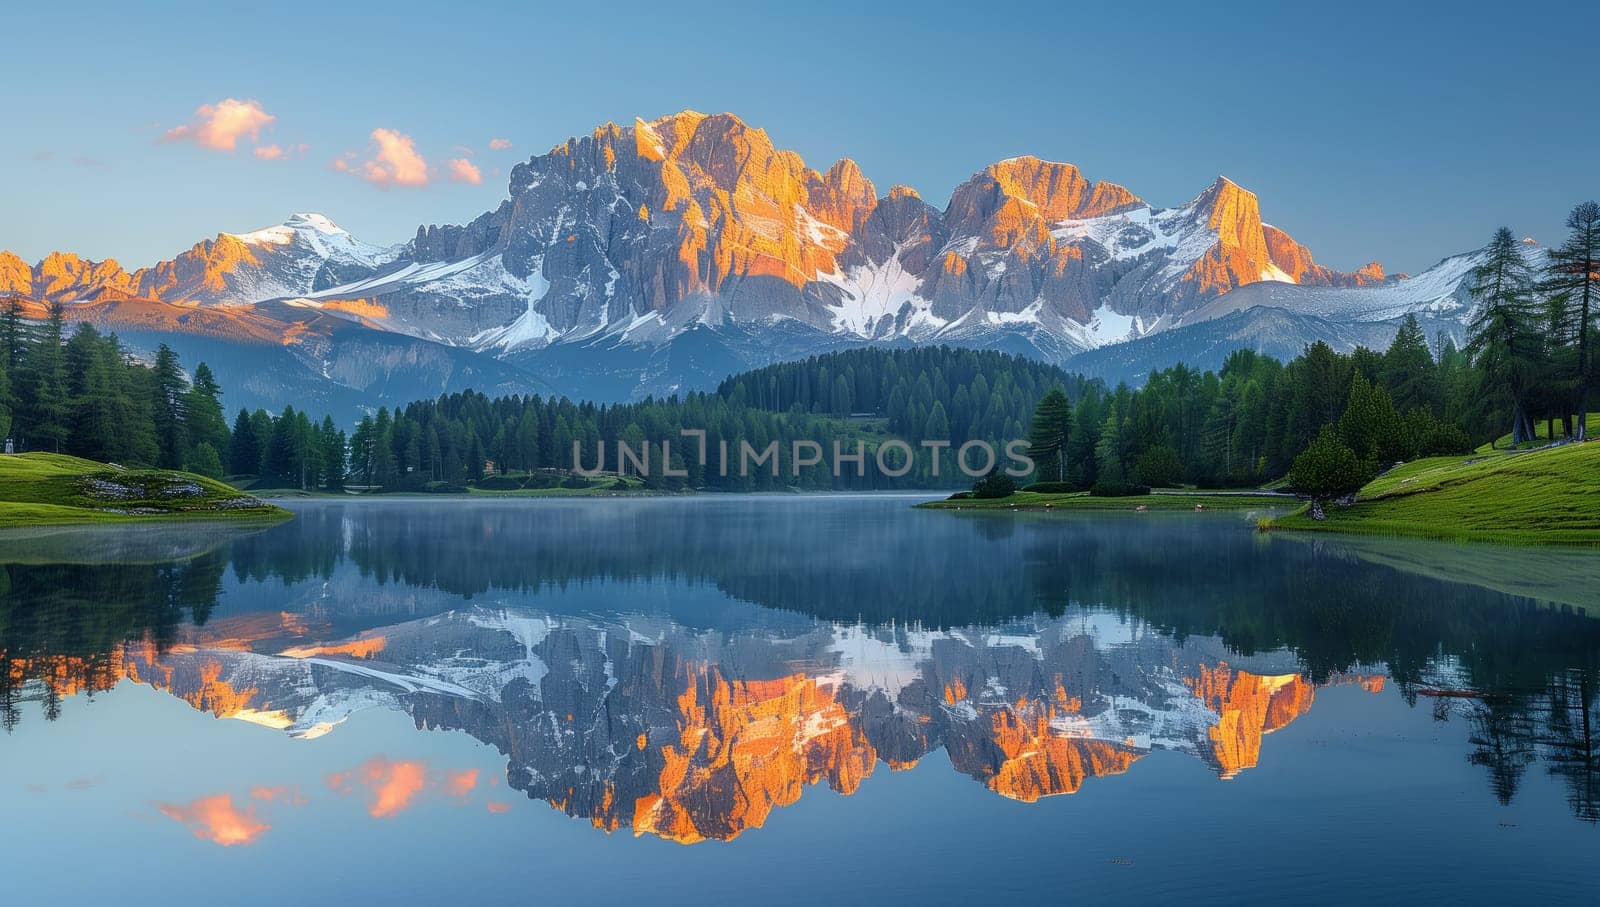 Mountain reflected in lake with trees and water in foreground by richwolf